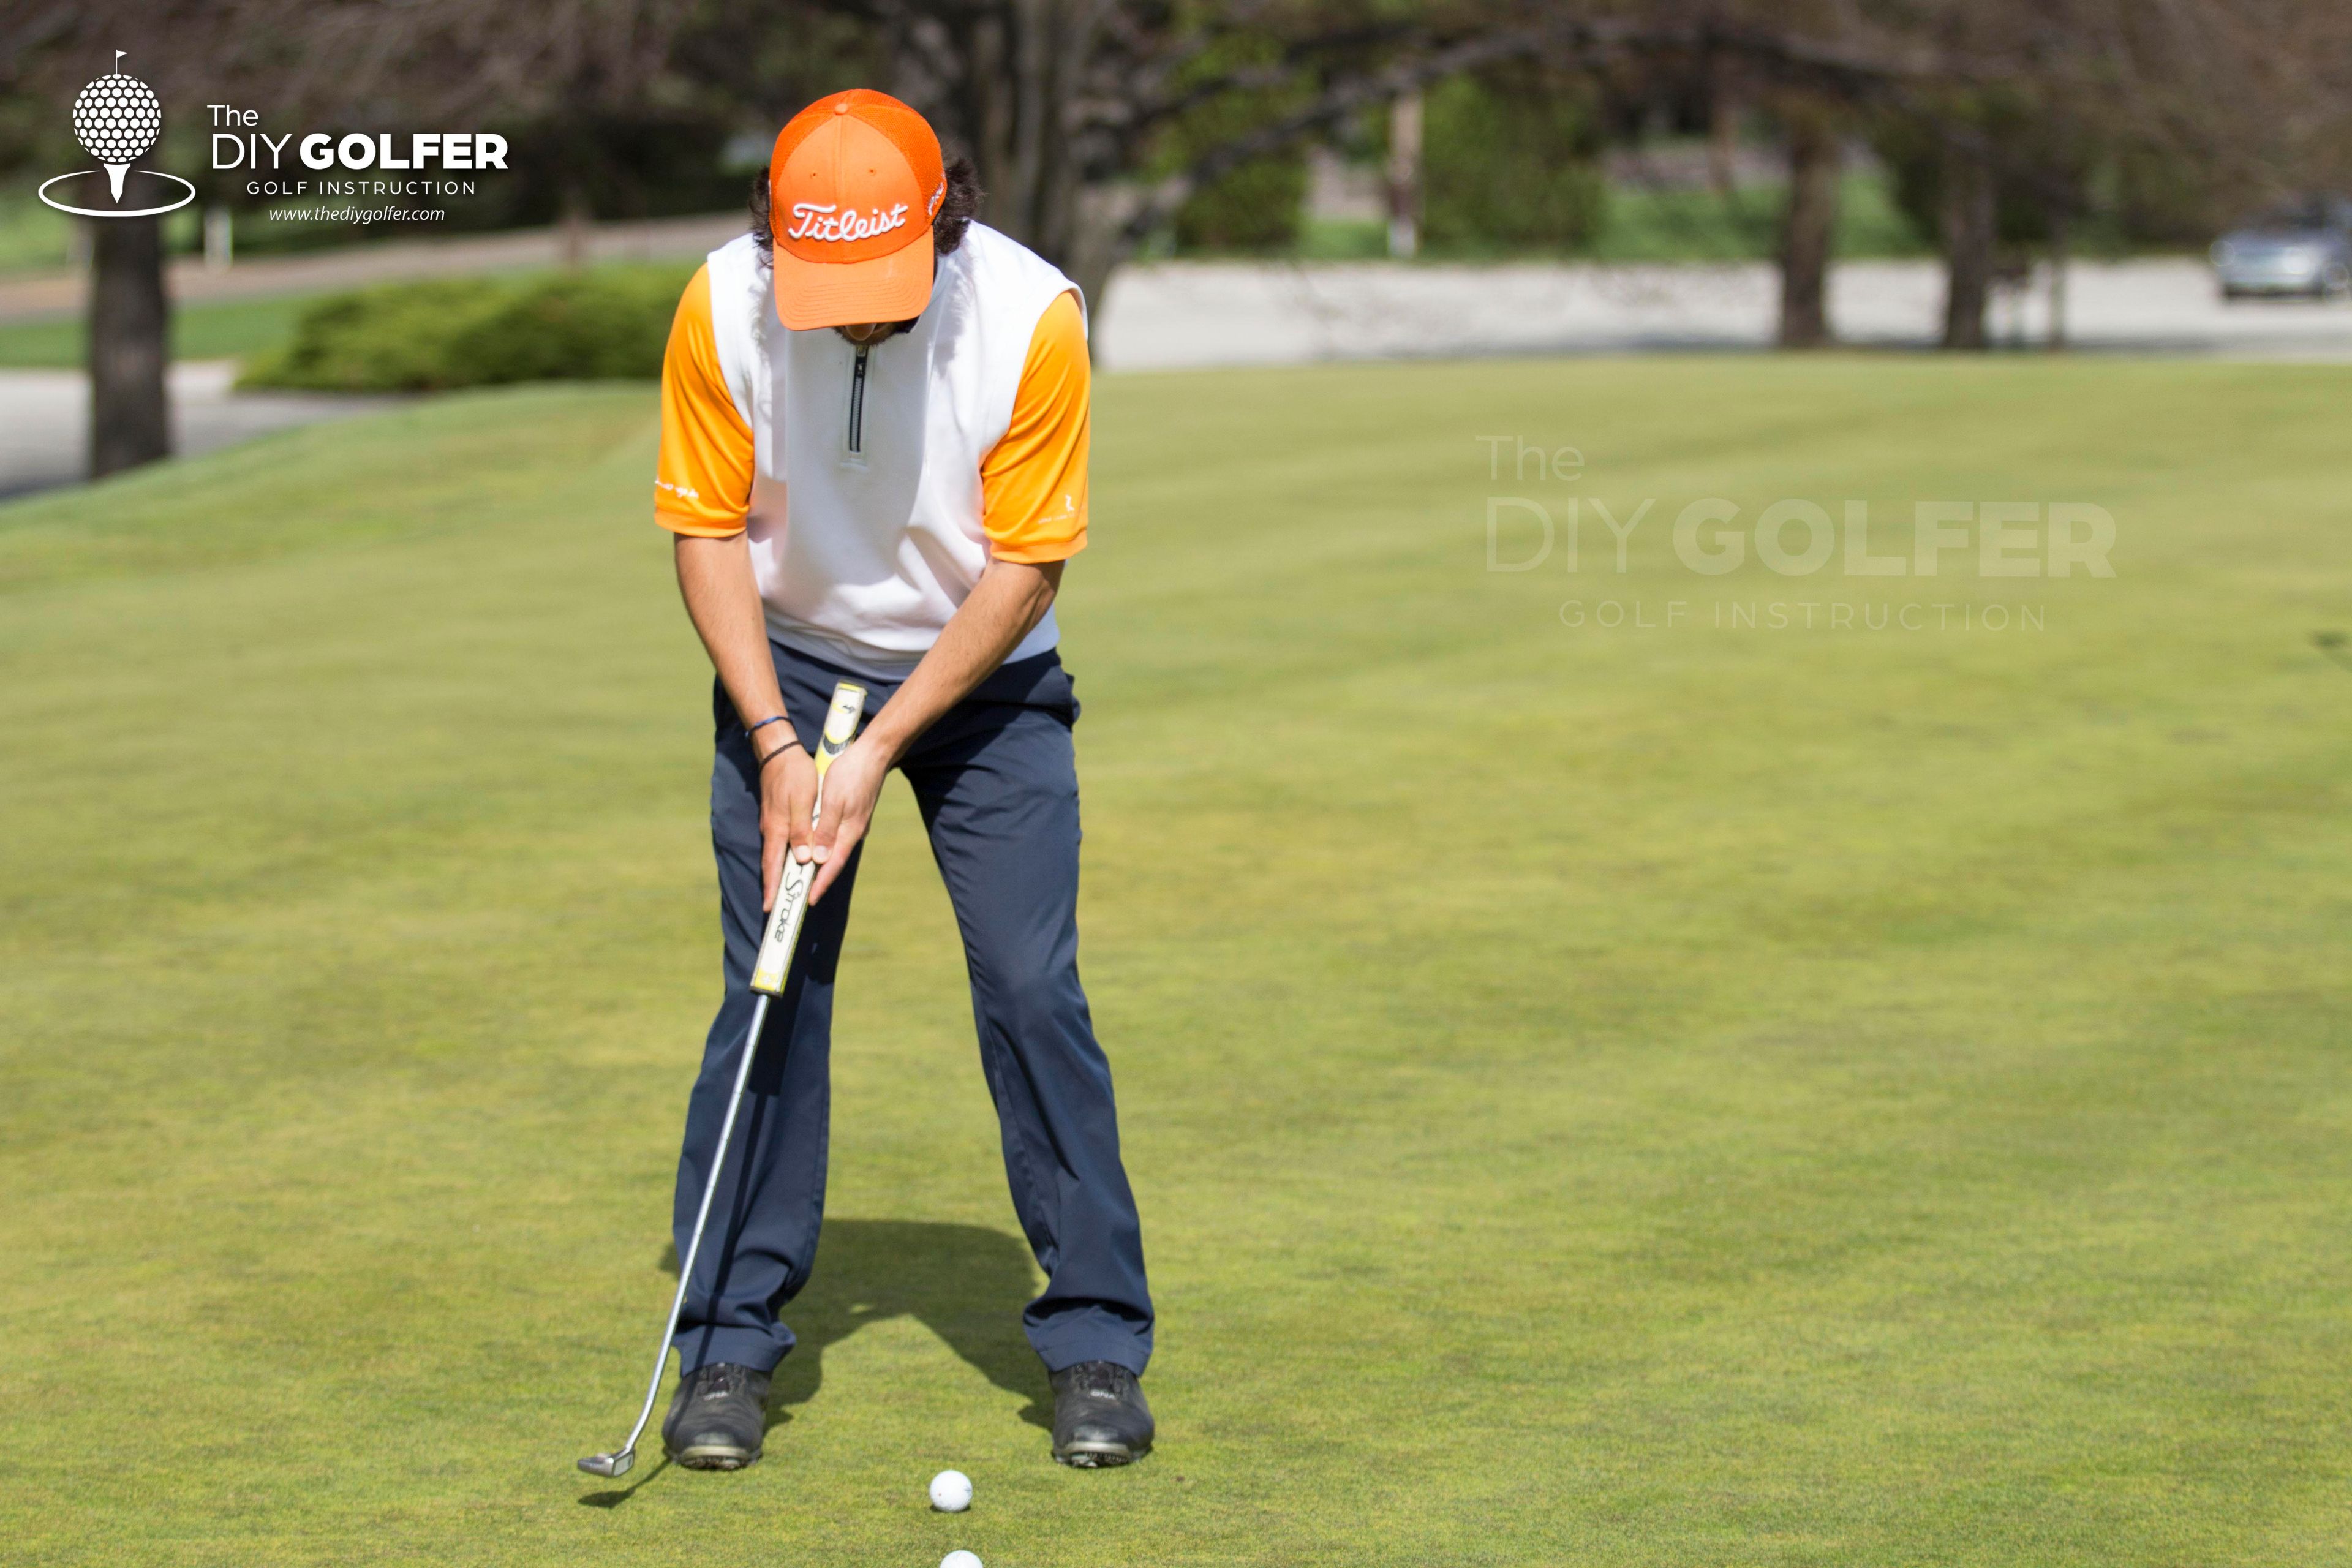 High Definition Golf Putting Photo: Face on Backstroke